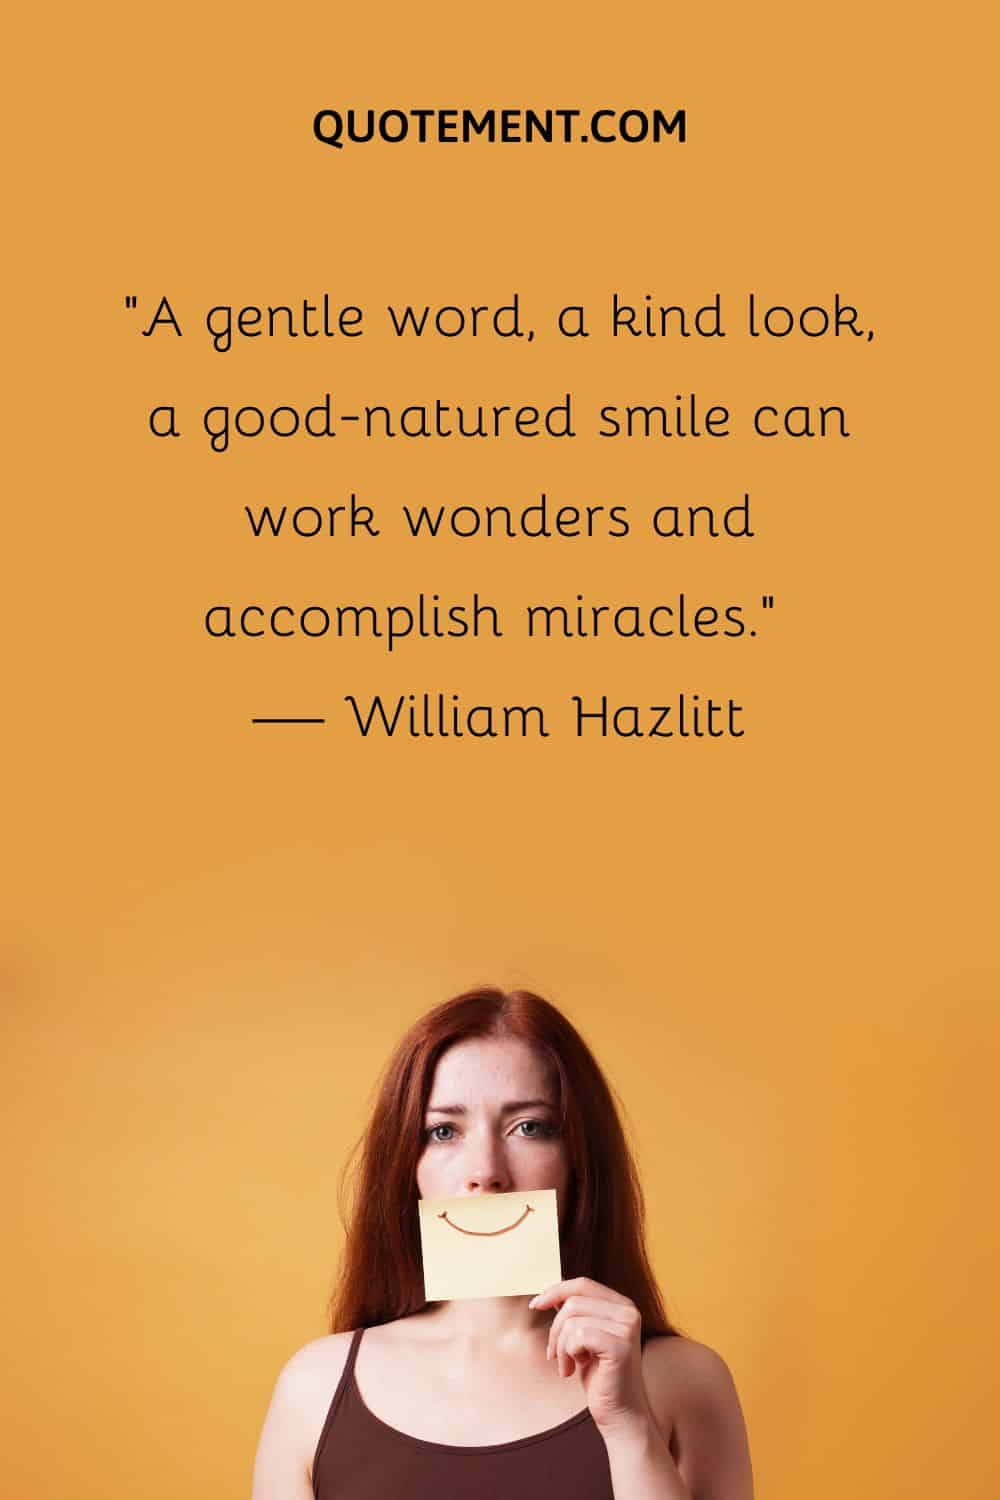 A gentle word, a kind look,